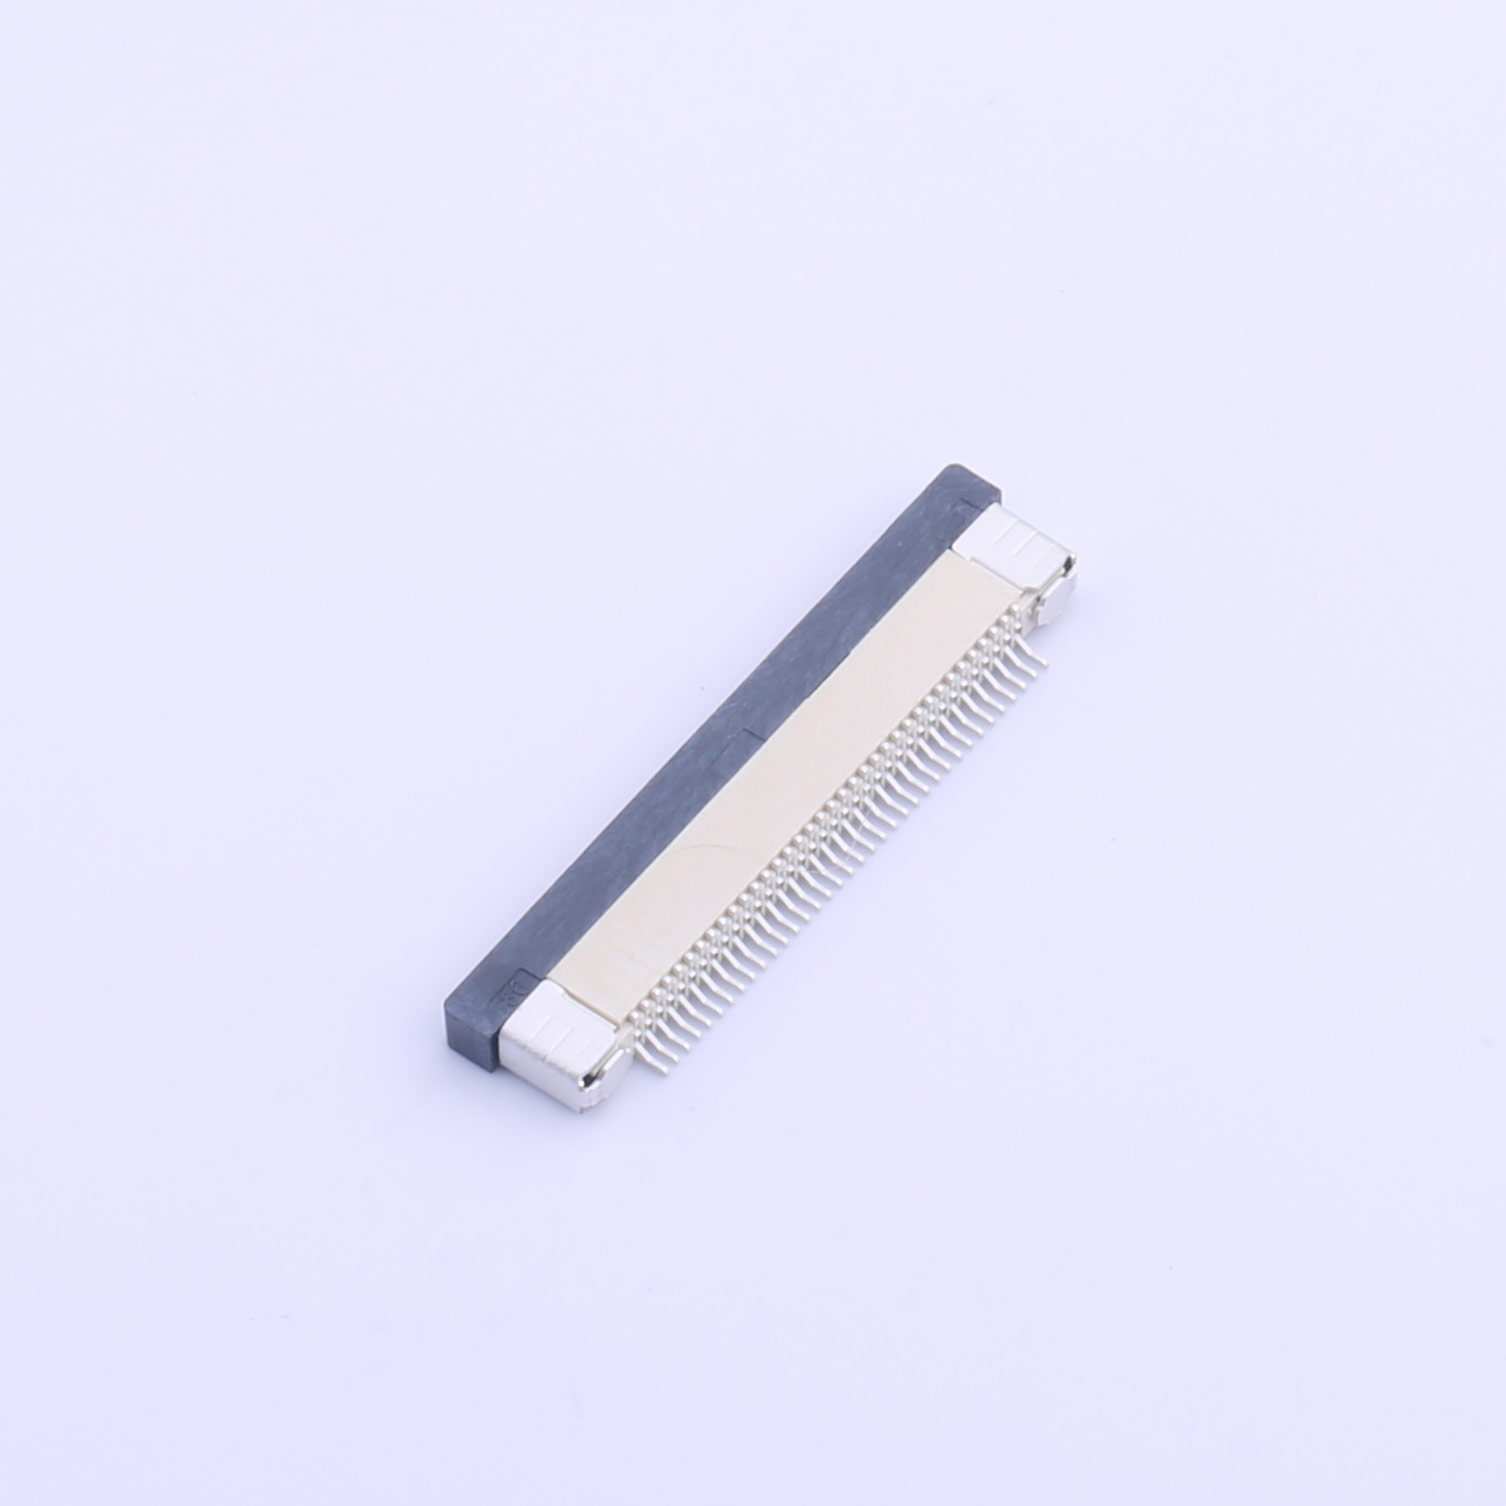 Kinghelm 0.5mm Pitch FPC FFC Connector 36P Height 2mm Drawer type lower connection Contact SMT FPC Connector